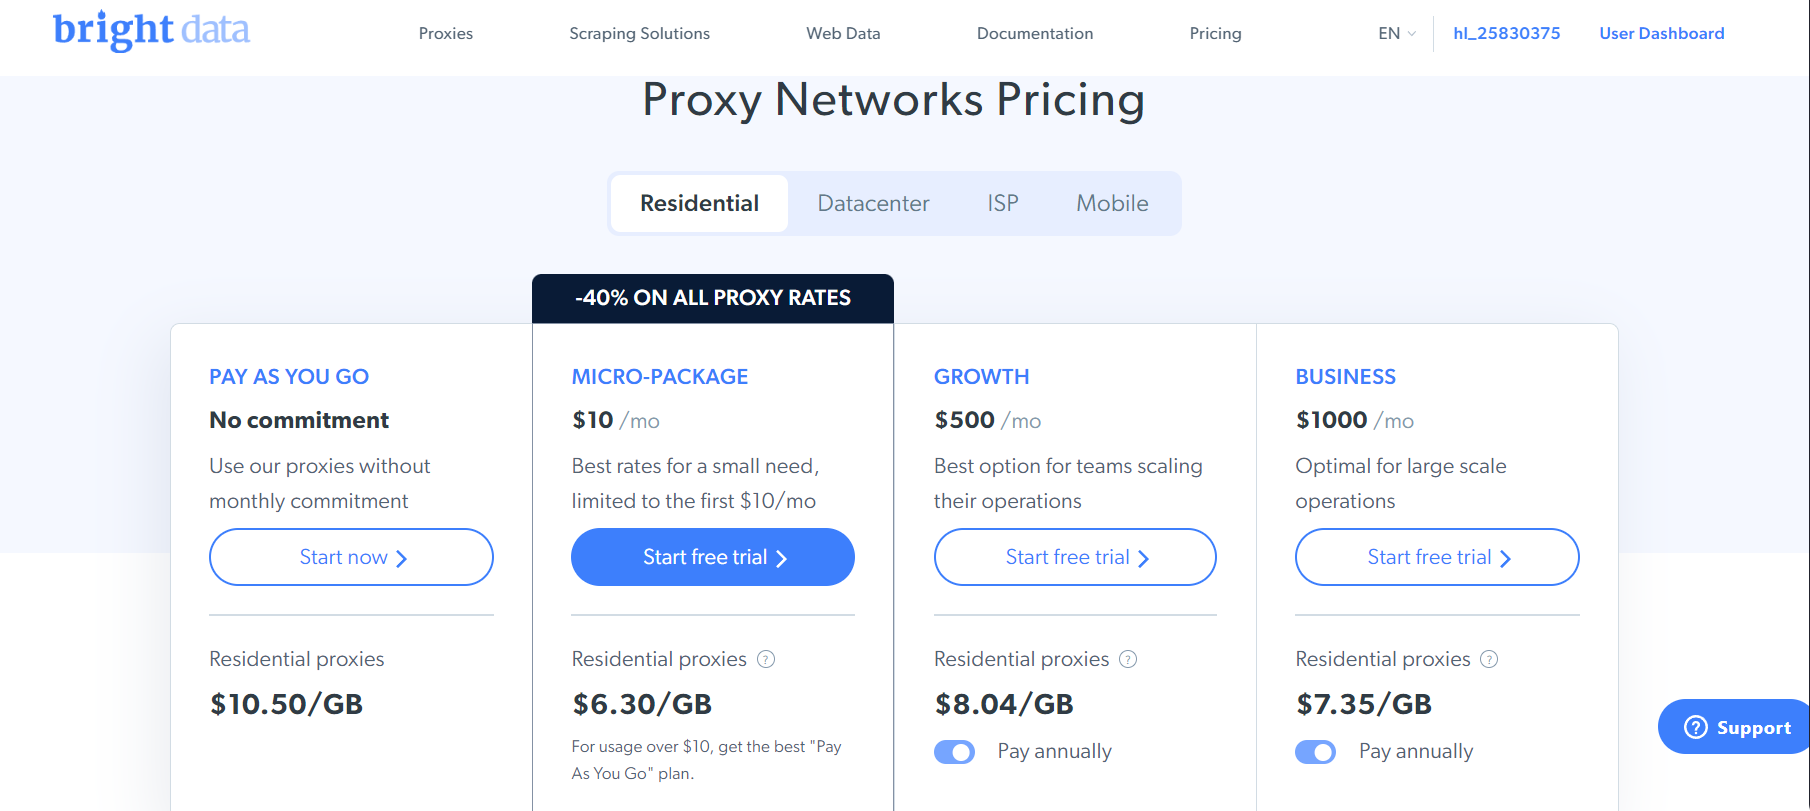 bright data residential proxies